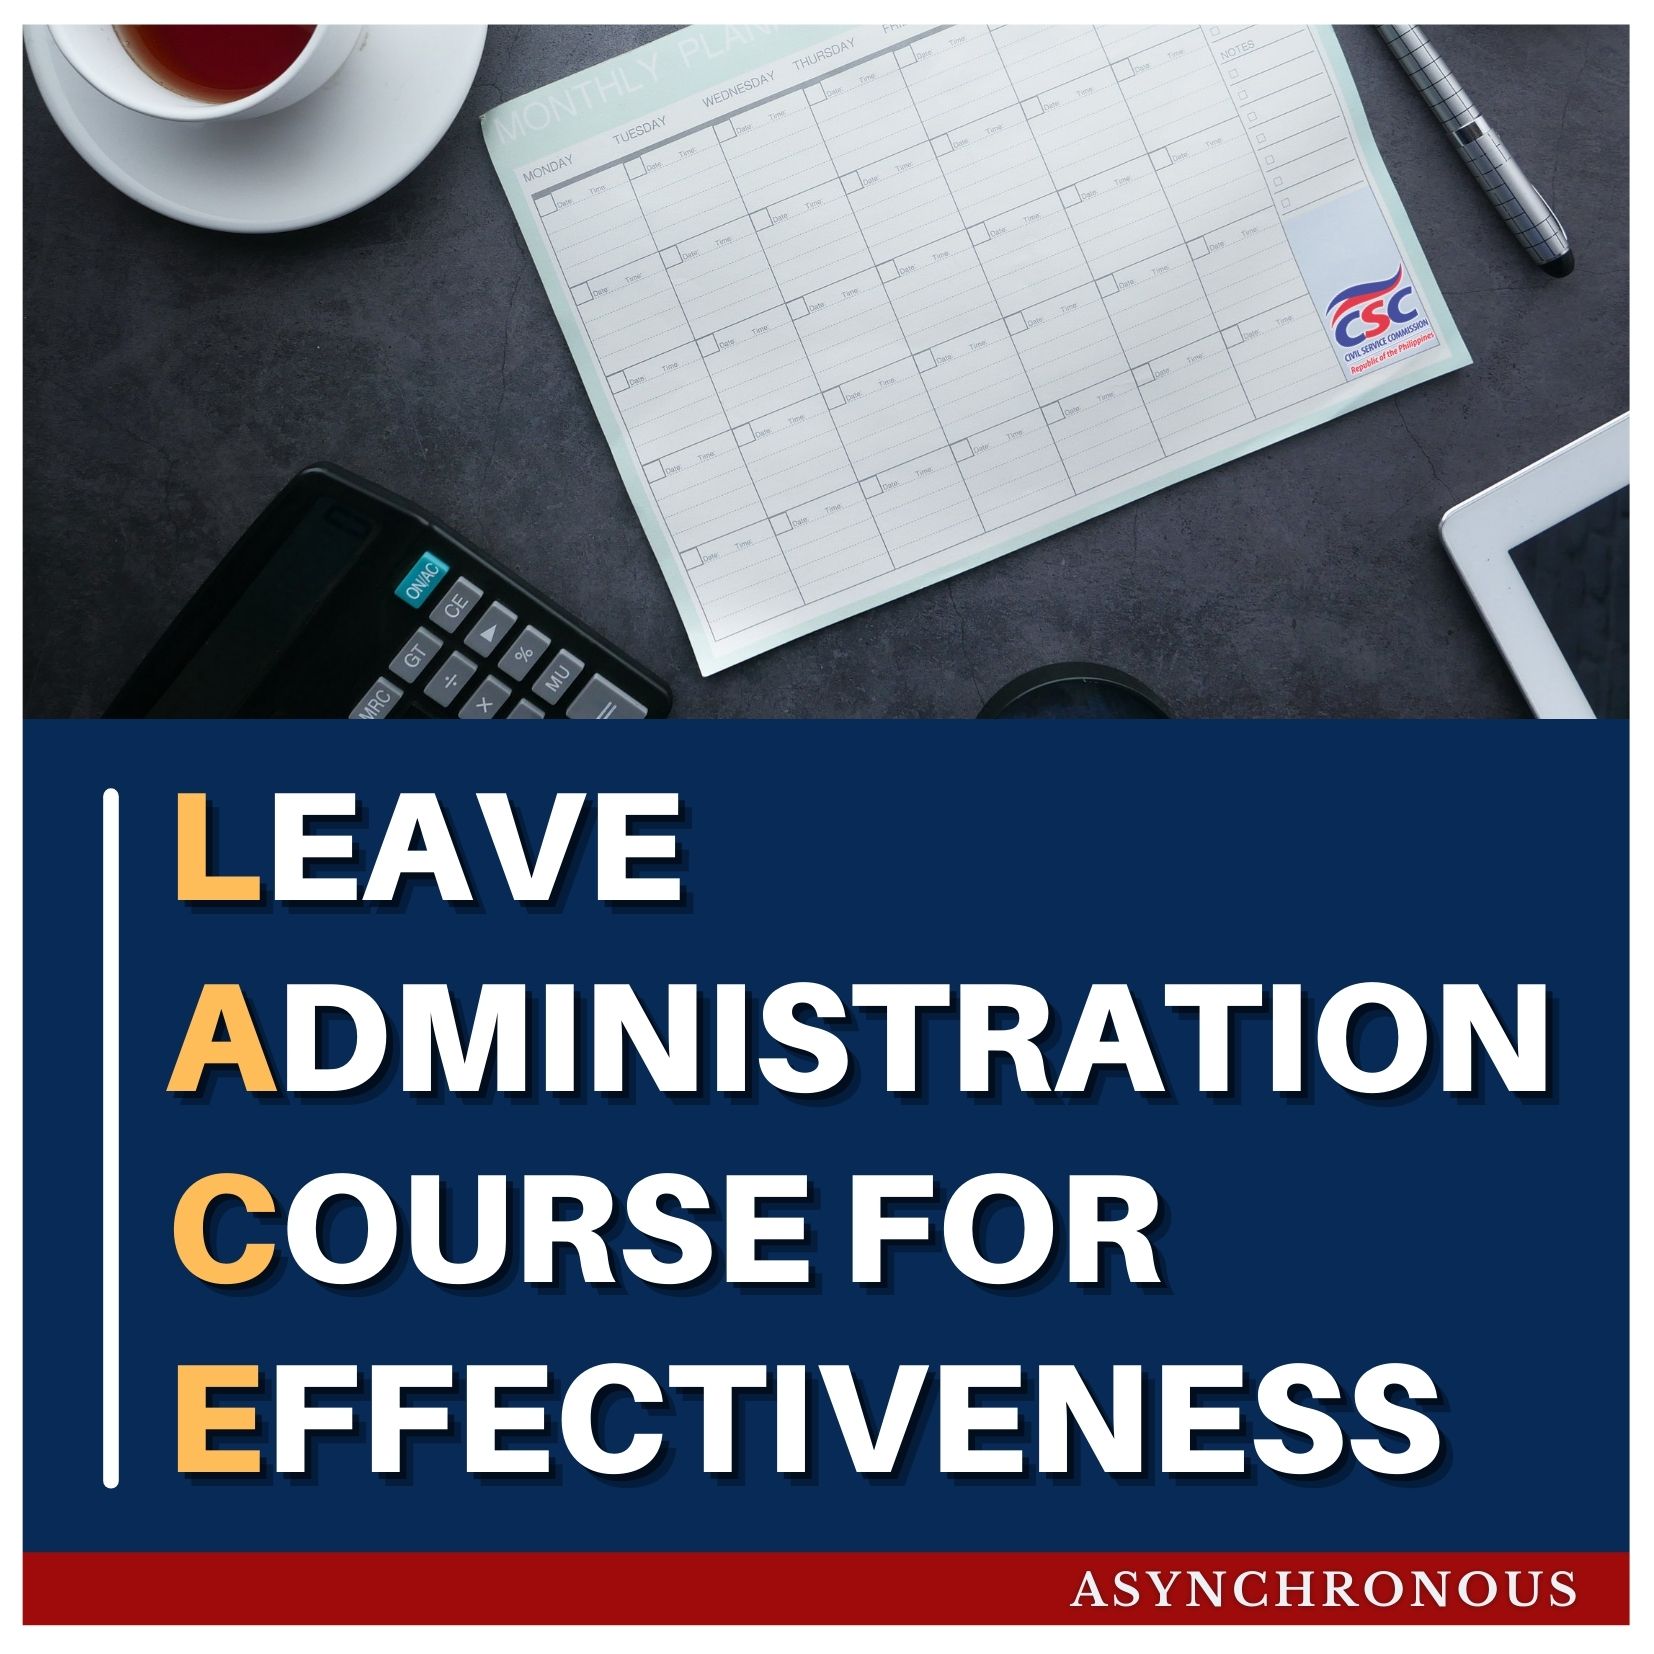 Leave Administration Course for Effectiveness